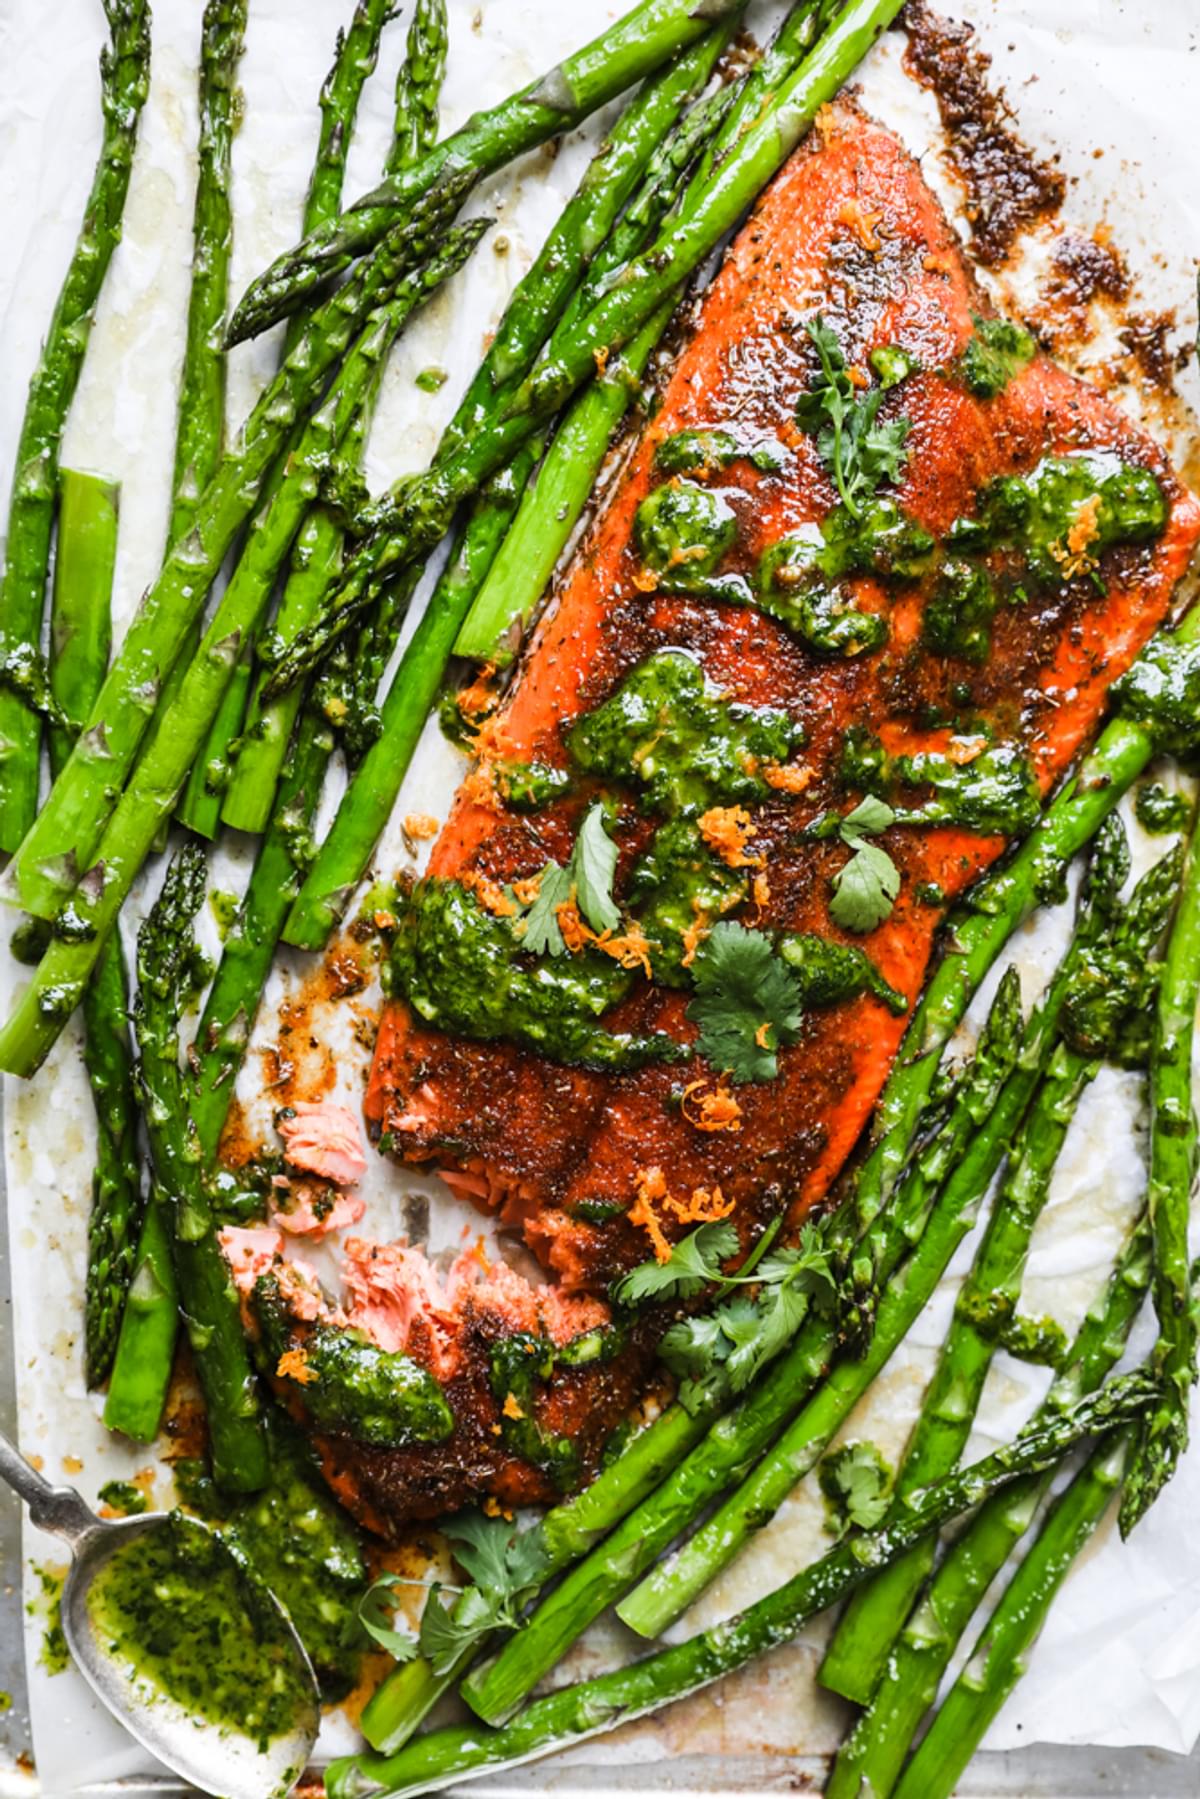 Blackened Salmon Sheet Pan Dinner with asparagus and cilantro ginger sauce